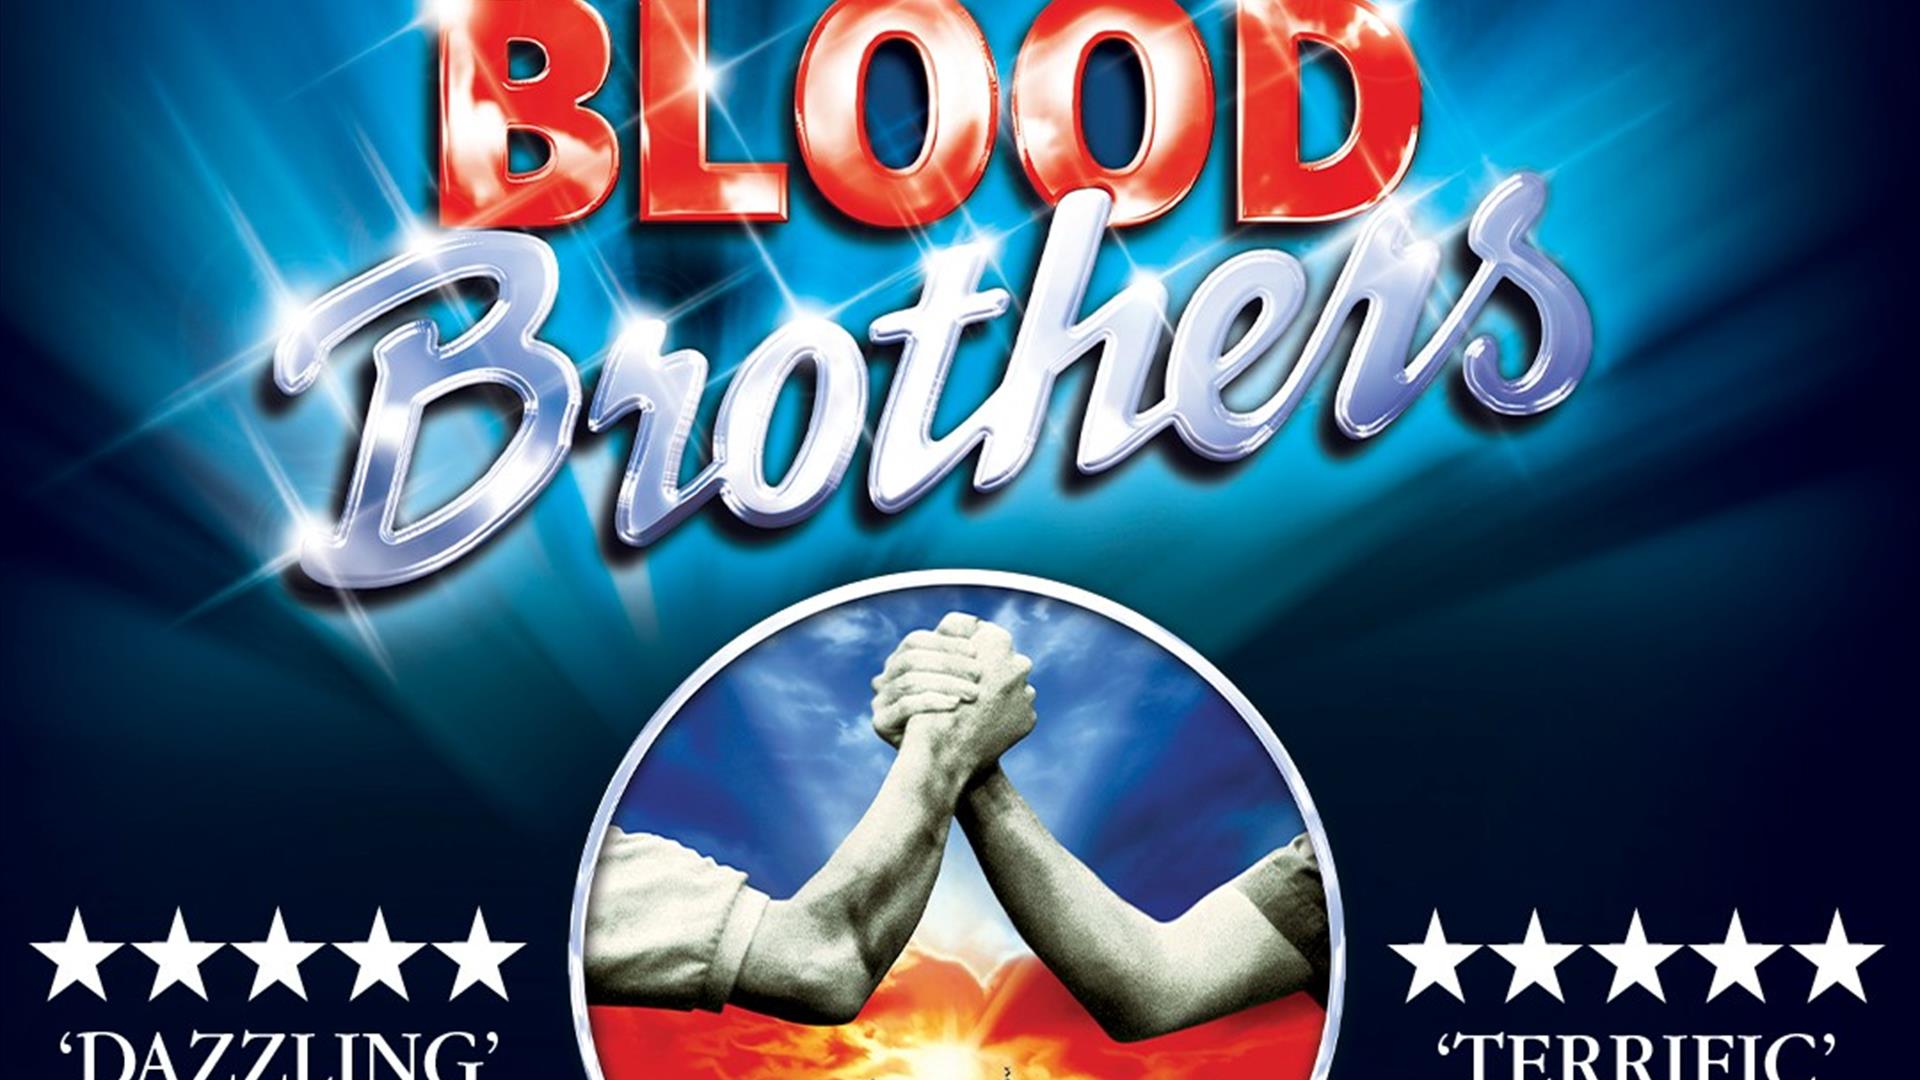 Millennium Forums poster for Blood Brothers - Tues 31st January until Sat 4th Feb 2023